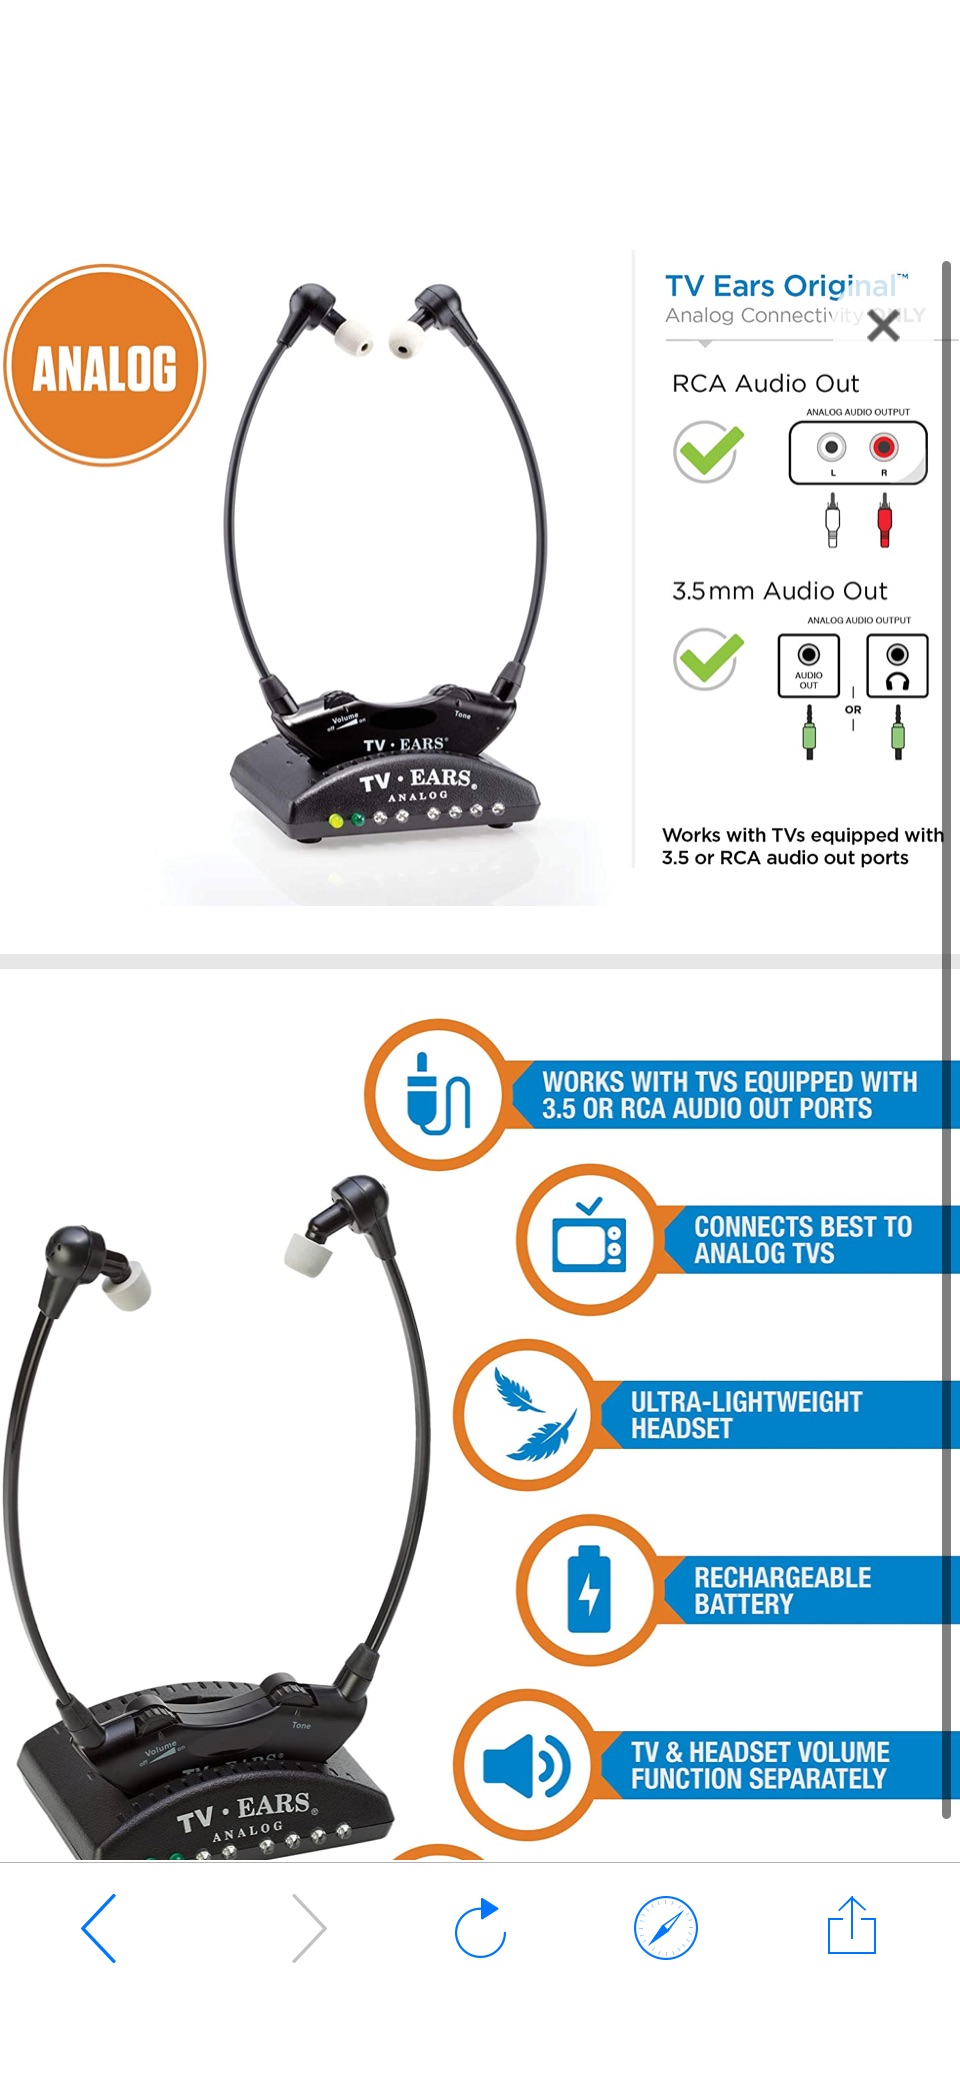 Amazon.com: TV Ears Original Wireless Headsets System, TV Hearing Aid Devices works best with Analog TV's, Hearing Assistance, TV原价129.95